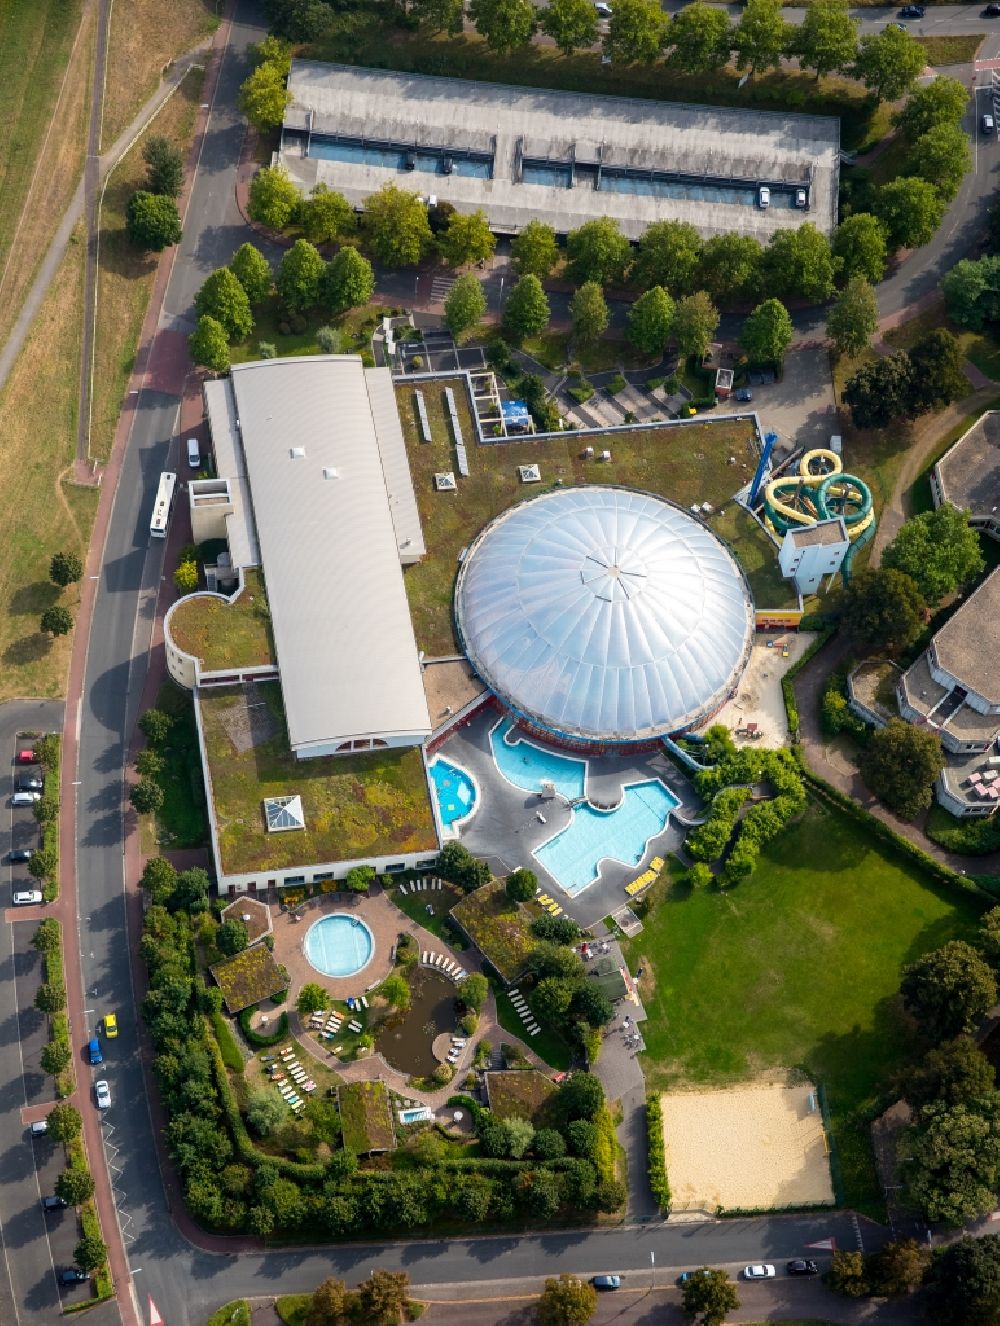 Dorsten from the bird's eye view: Spa and swimming pools at the swimming pool of the leisure facility Atlantis Dorsten on Konrad-Adenauer-Platz in Dorsten in the state North Rhine-Westphalia